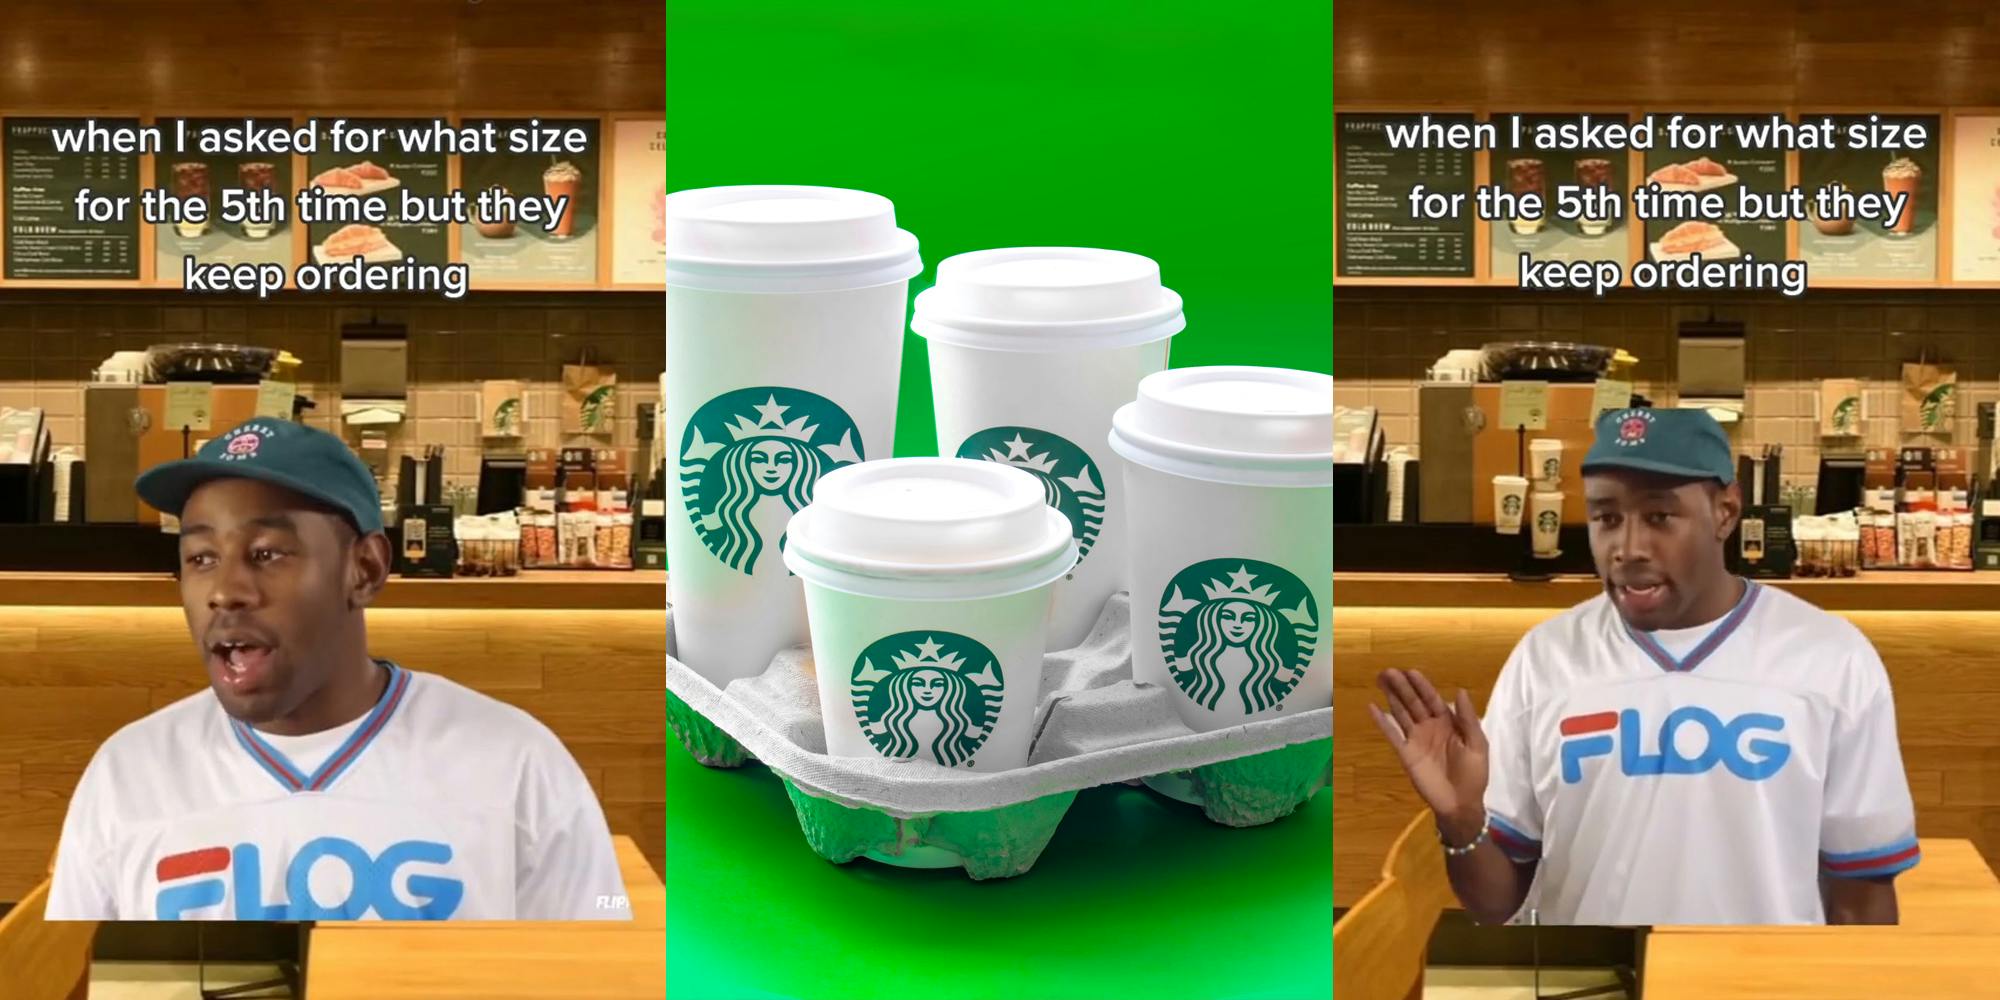 Tyler the Creator let me do what I need to do meme over Starbucks background with caption "when I asked for what size for the 5th time but they keep ordering" (l) Starbucks different sized cups in front of green background (c) Tyler the Creator let me do what I need to do meme over Starbucks background with caption "when I asked for what size for the 5th time but they keep ordering" (r)